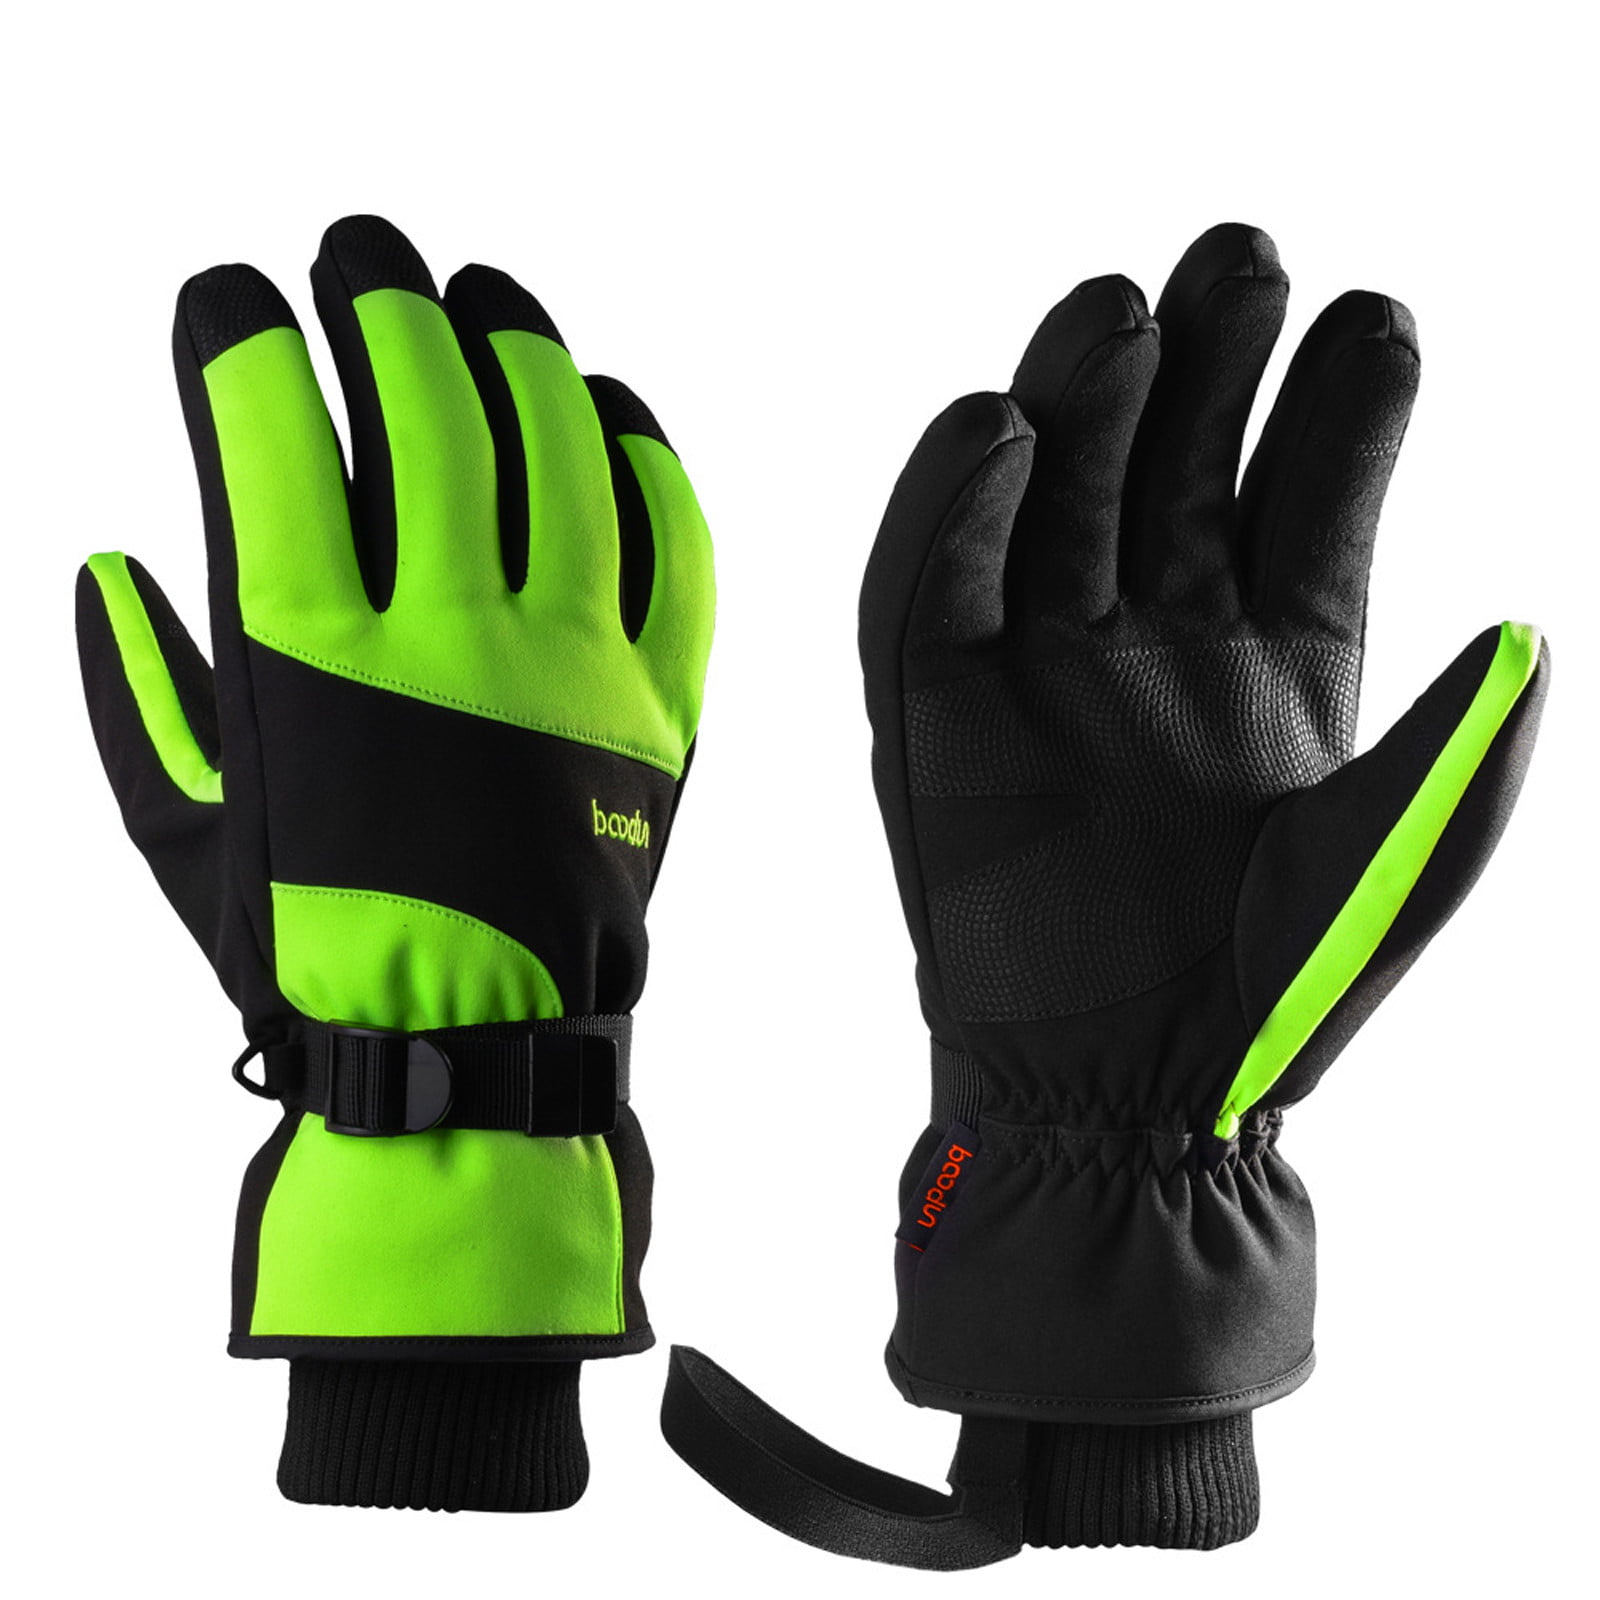 FINGERLESS Cycling & Gym Bodybuilding Sport Gloves Training Workout Hiking Green 